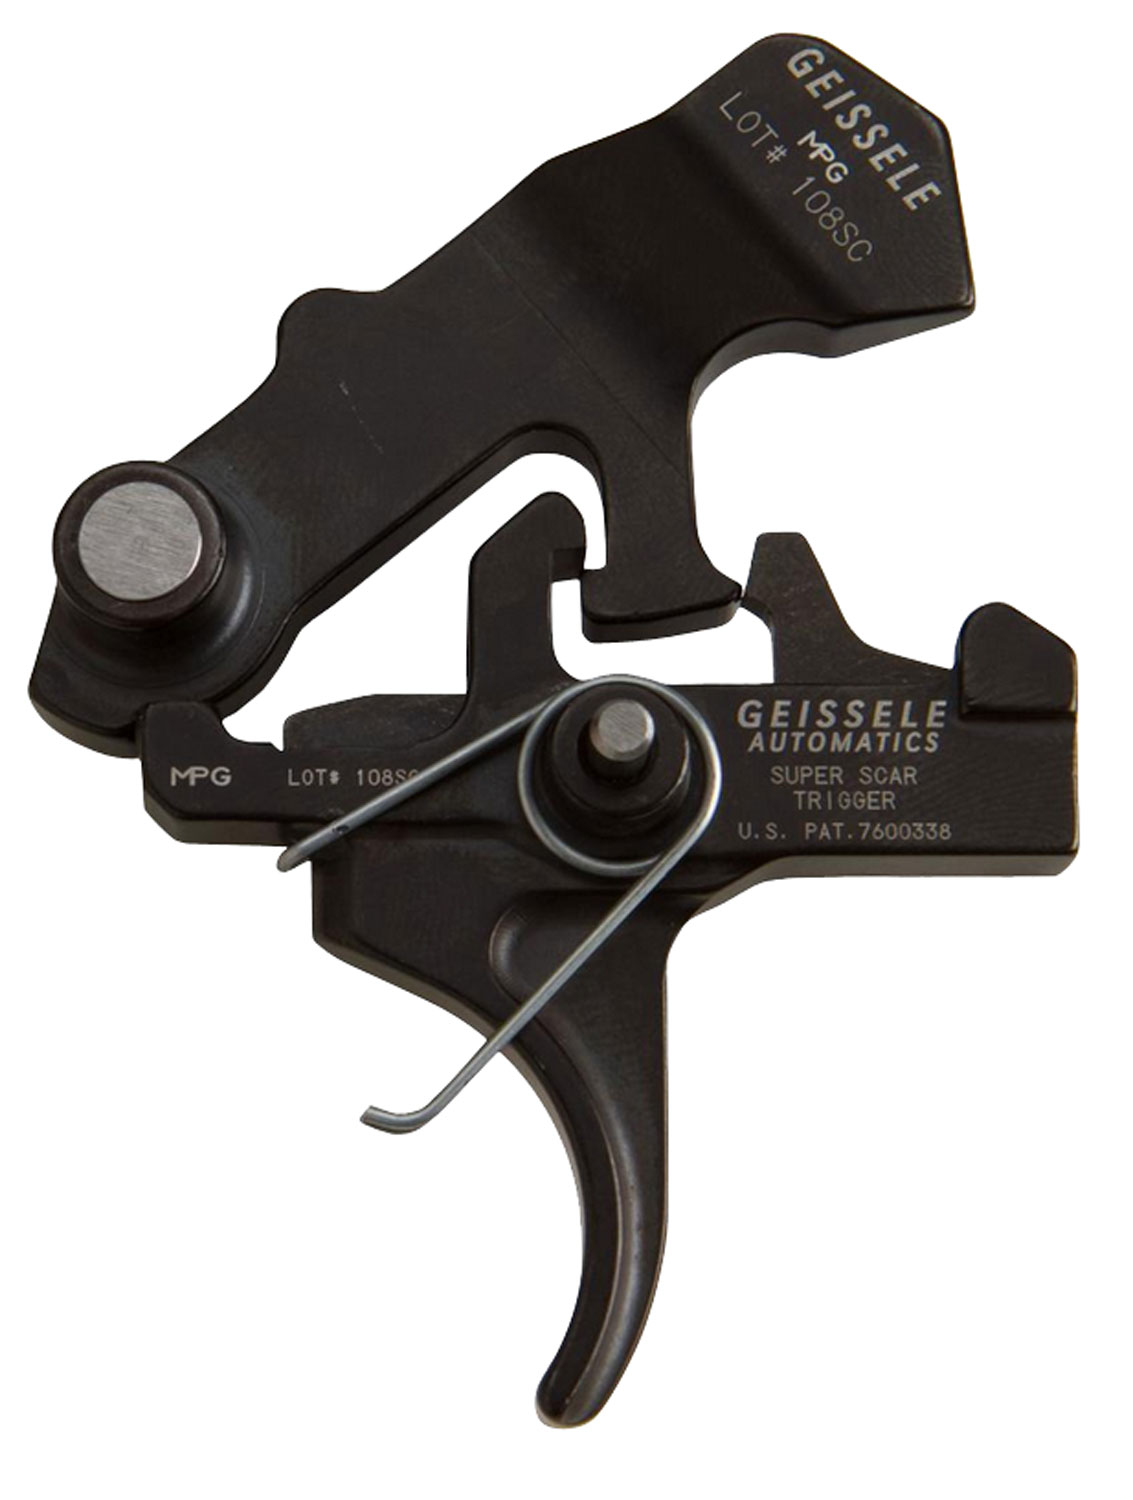 Geissele Automatics 05157 Super Scar  Black Oxide Curved Trigger Two-Stage 3.20-4.60 lbs Draw Weight for FN SCAR